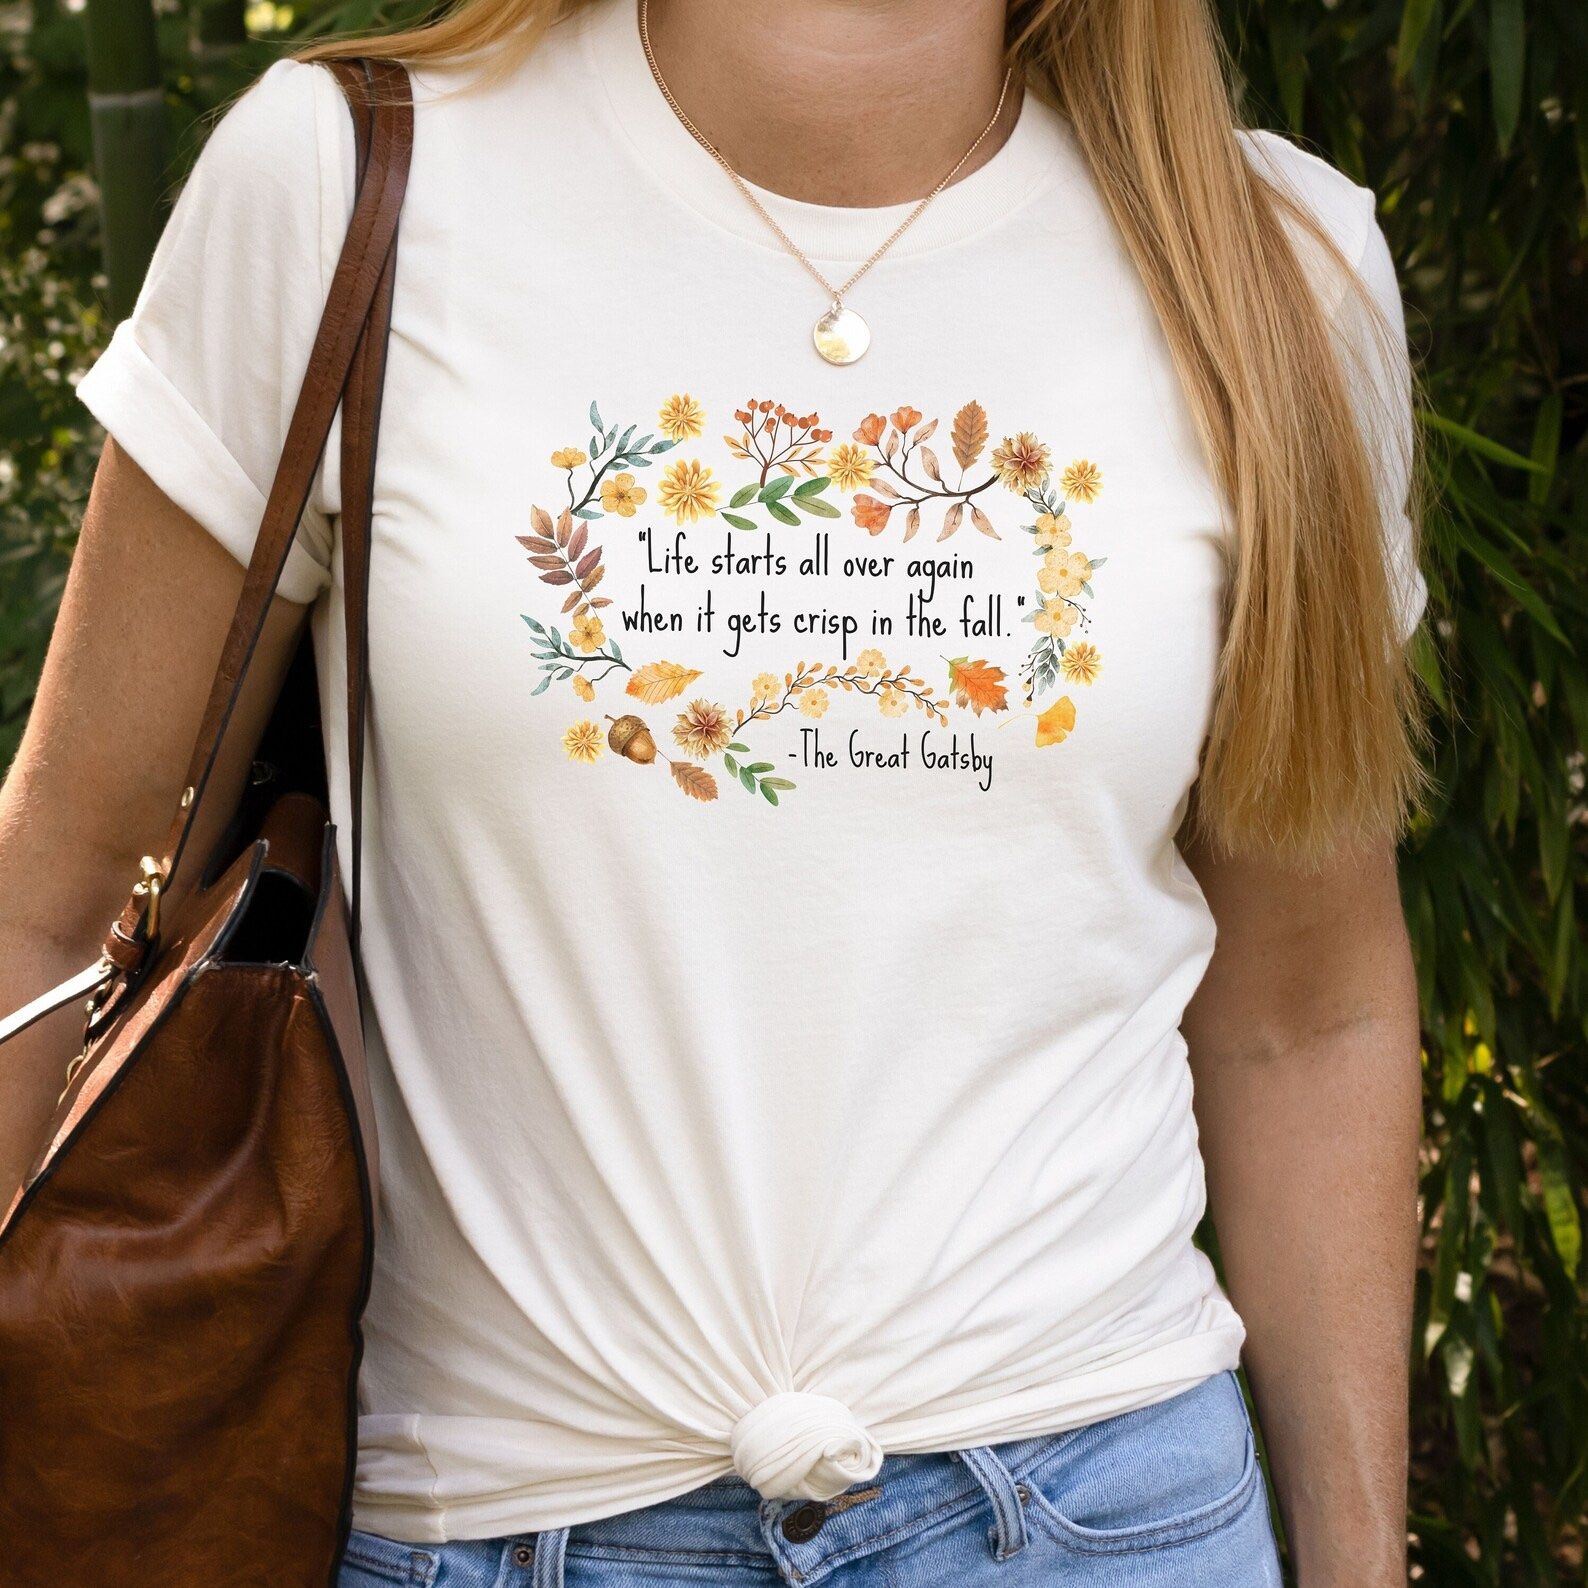 t-shirt with quote from the great gatsby "life starts all over again when it gets crisp in the fall"